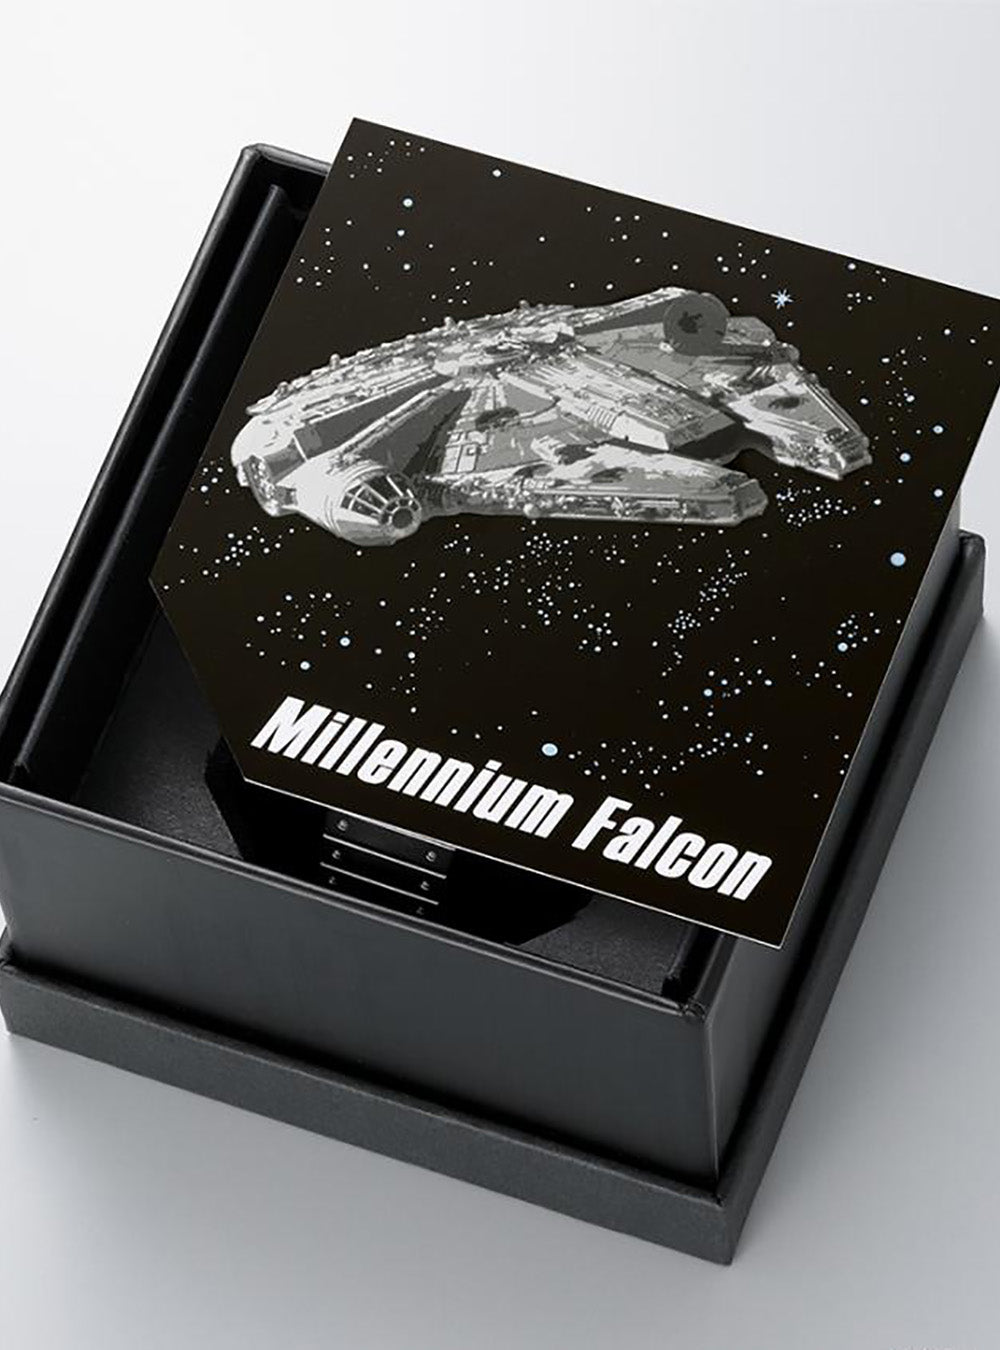 CITIZEN COLLECTION RECORD LABEL THERMO SENSOR "MILLENNIUM FALCON" JG2146-53H LIMITED EDITION JAPAN MOV'T JDMWRISTWATCHjapan-select